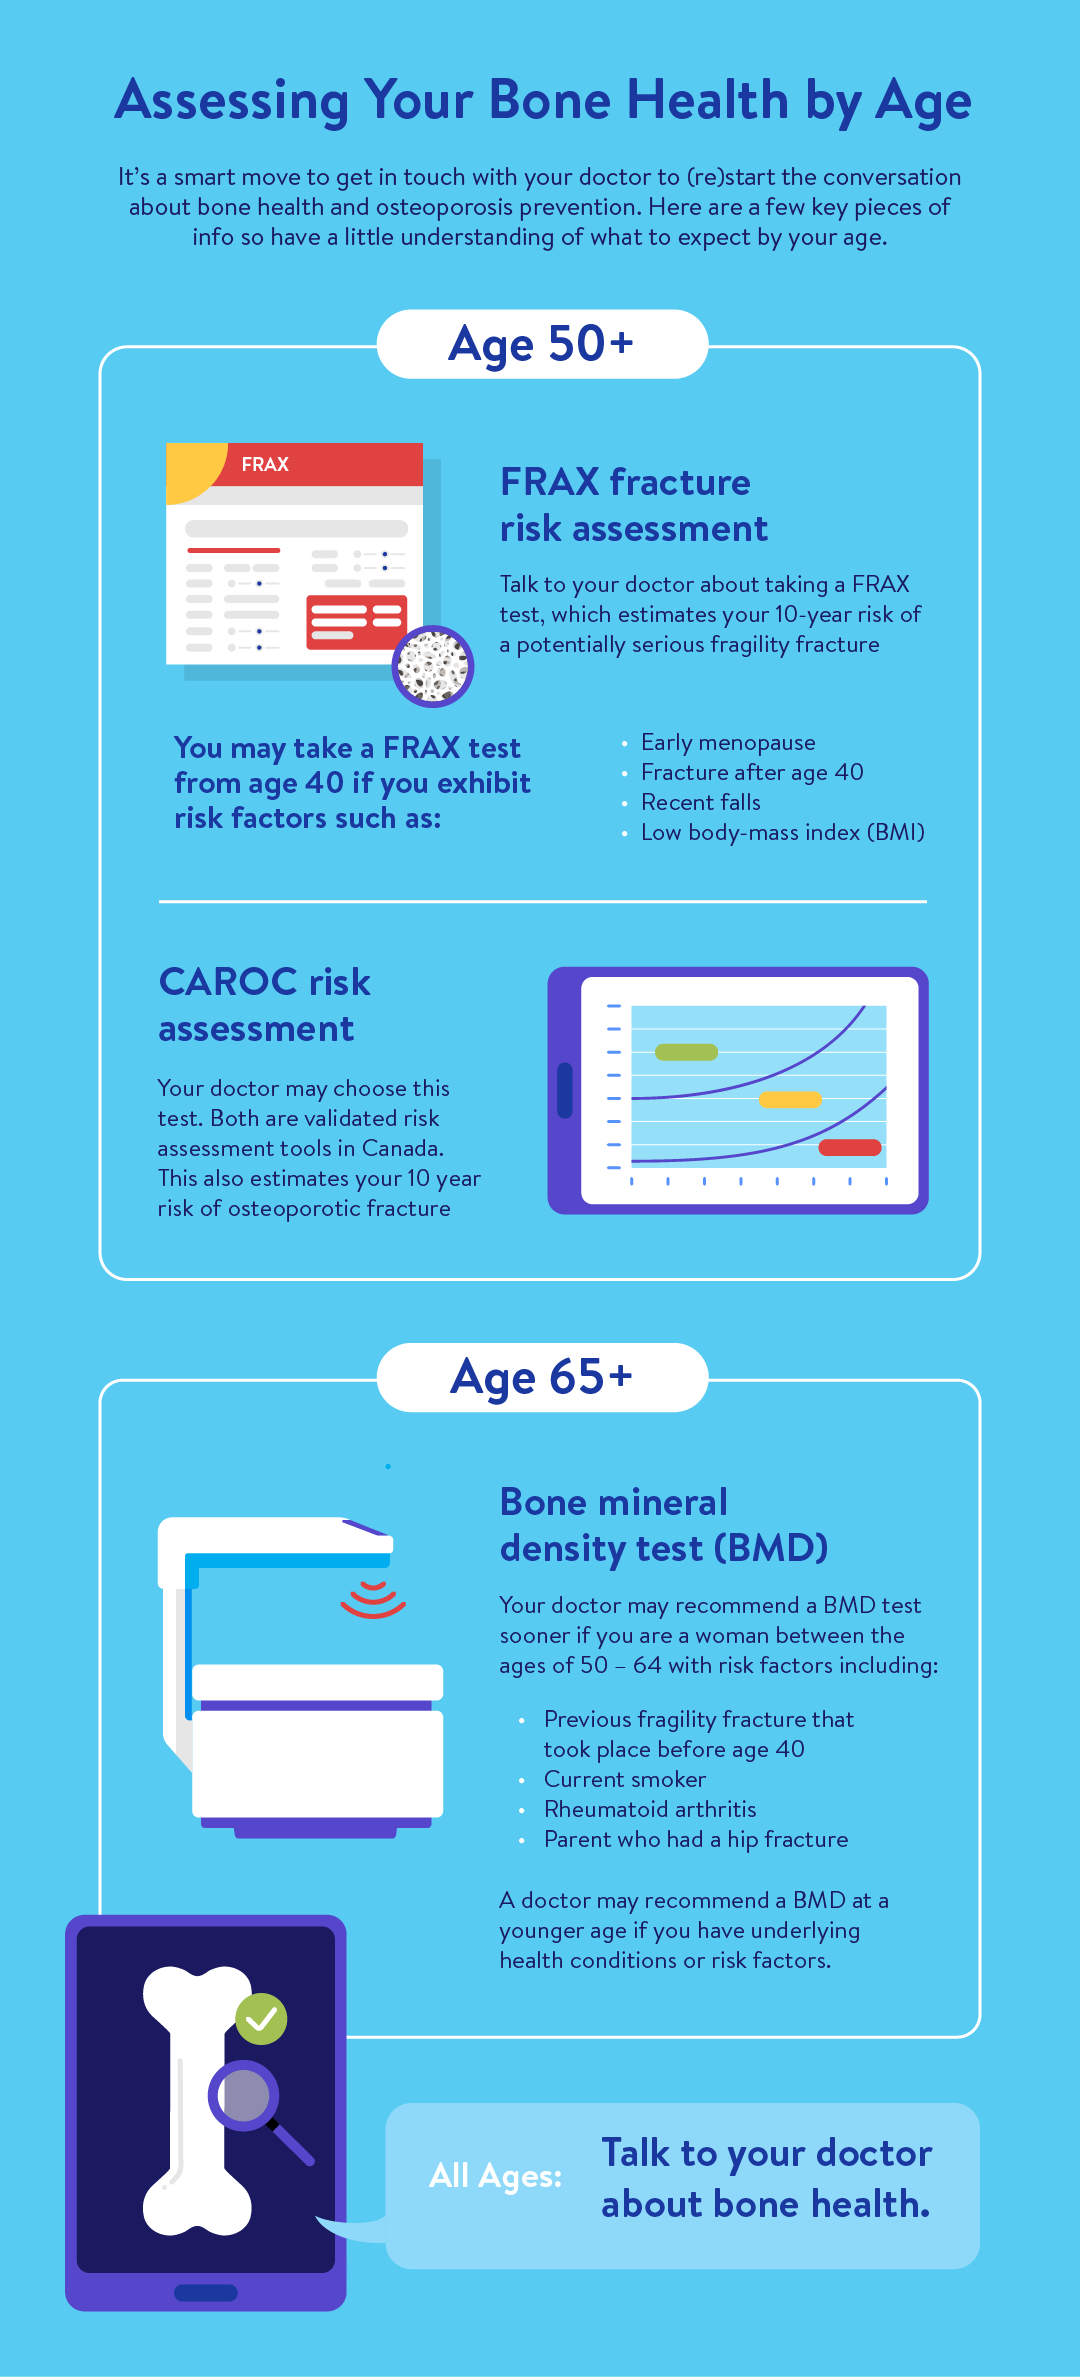 Infographic: Assessing bone health by age. (E.g., Age 50+ for FRAX test; talking to doctor: all ages)